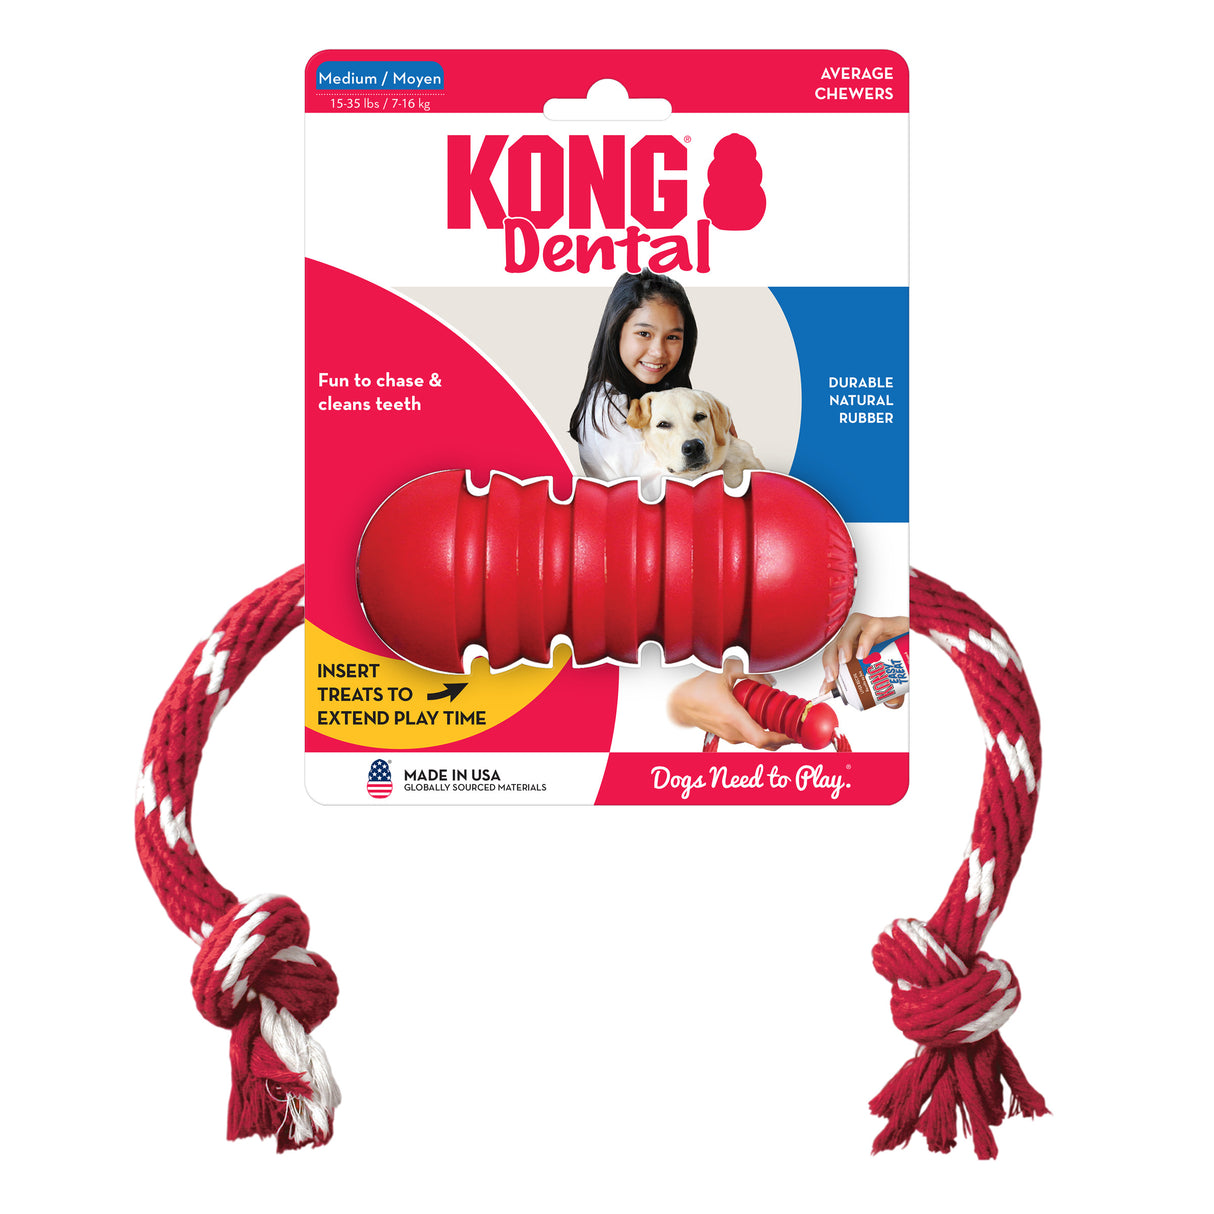 KONG Dental with Rope #size_m